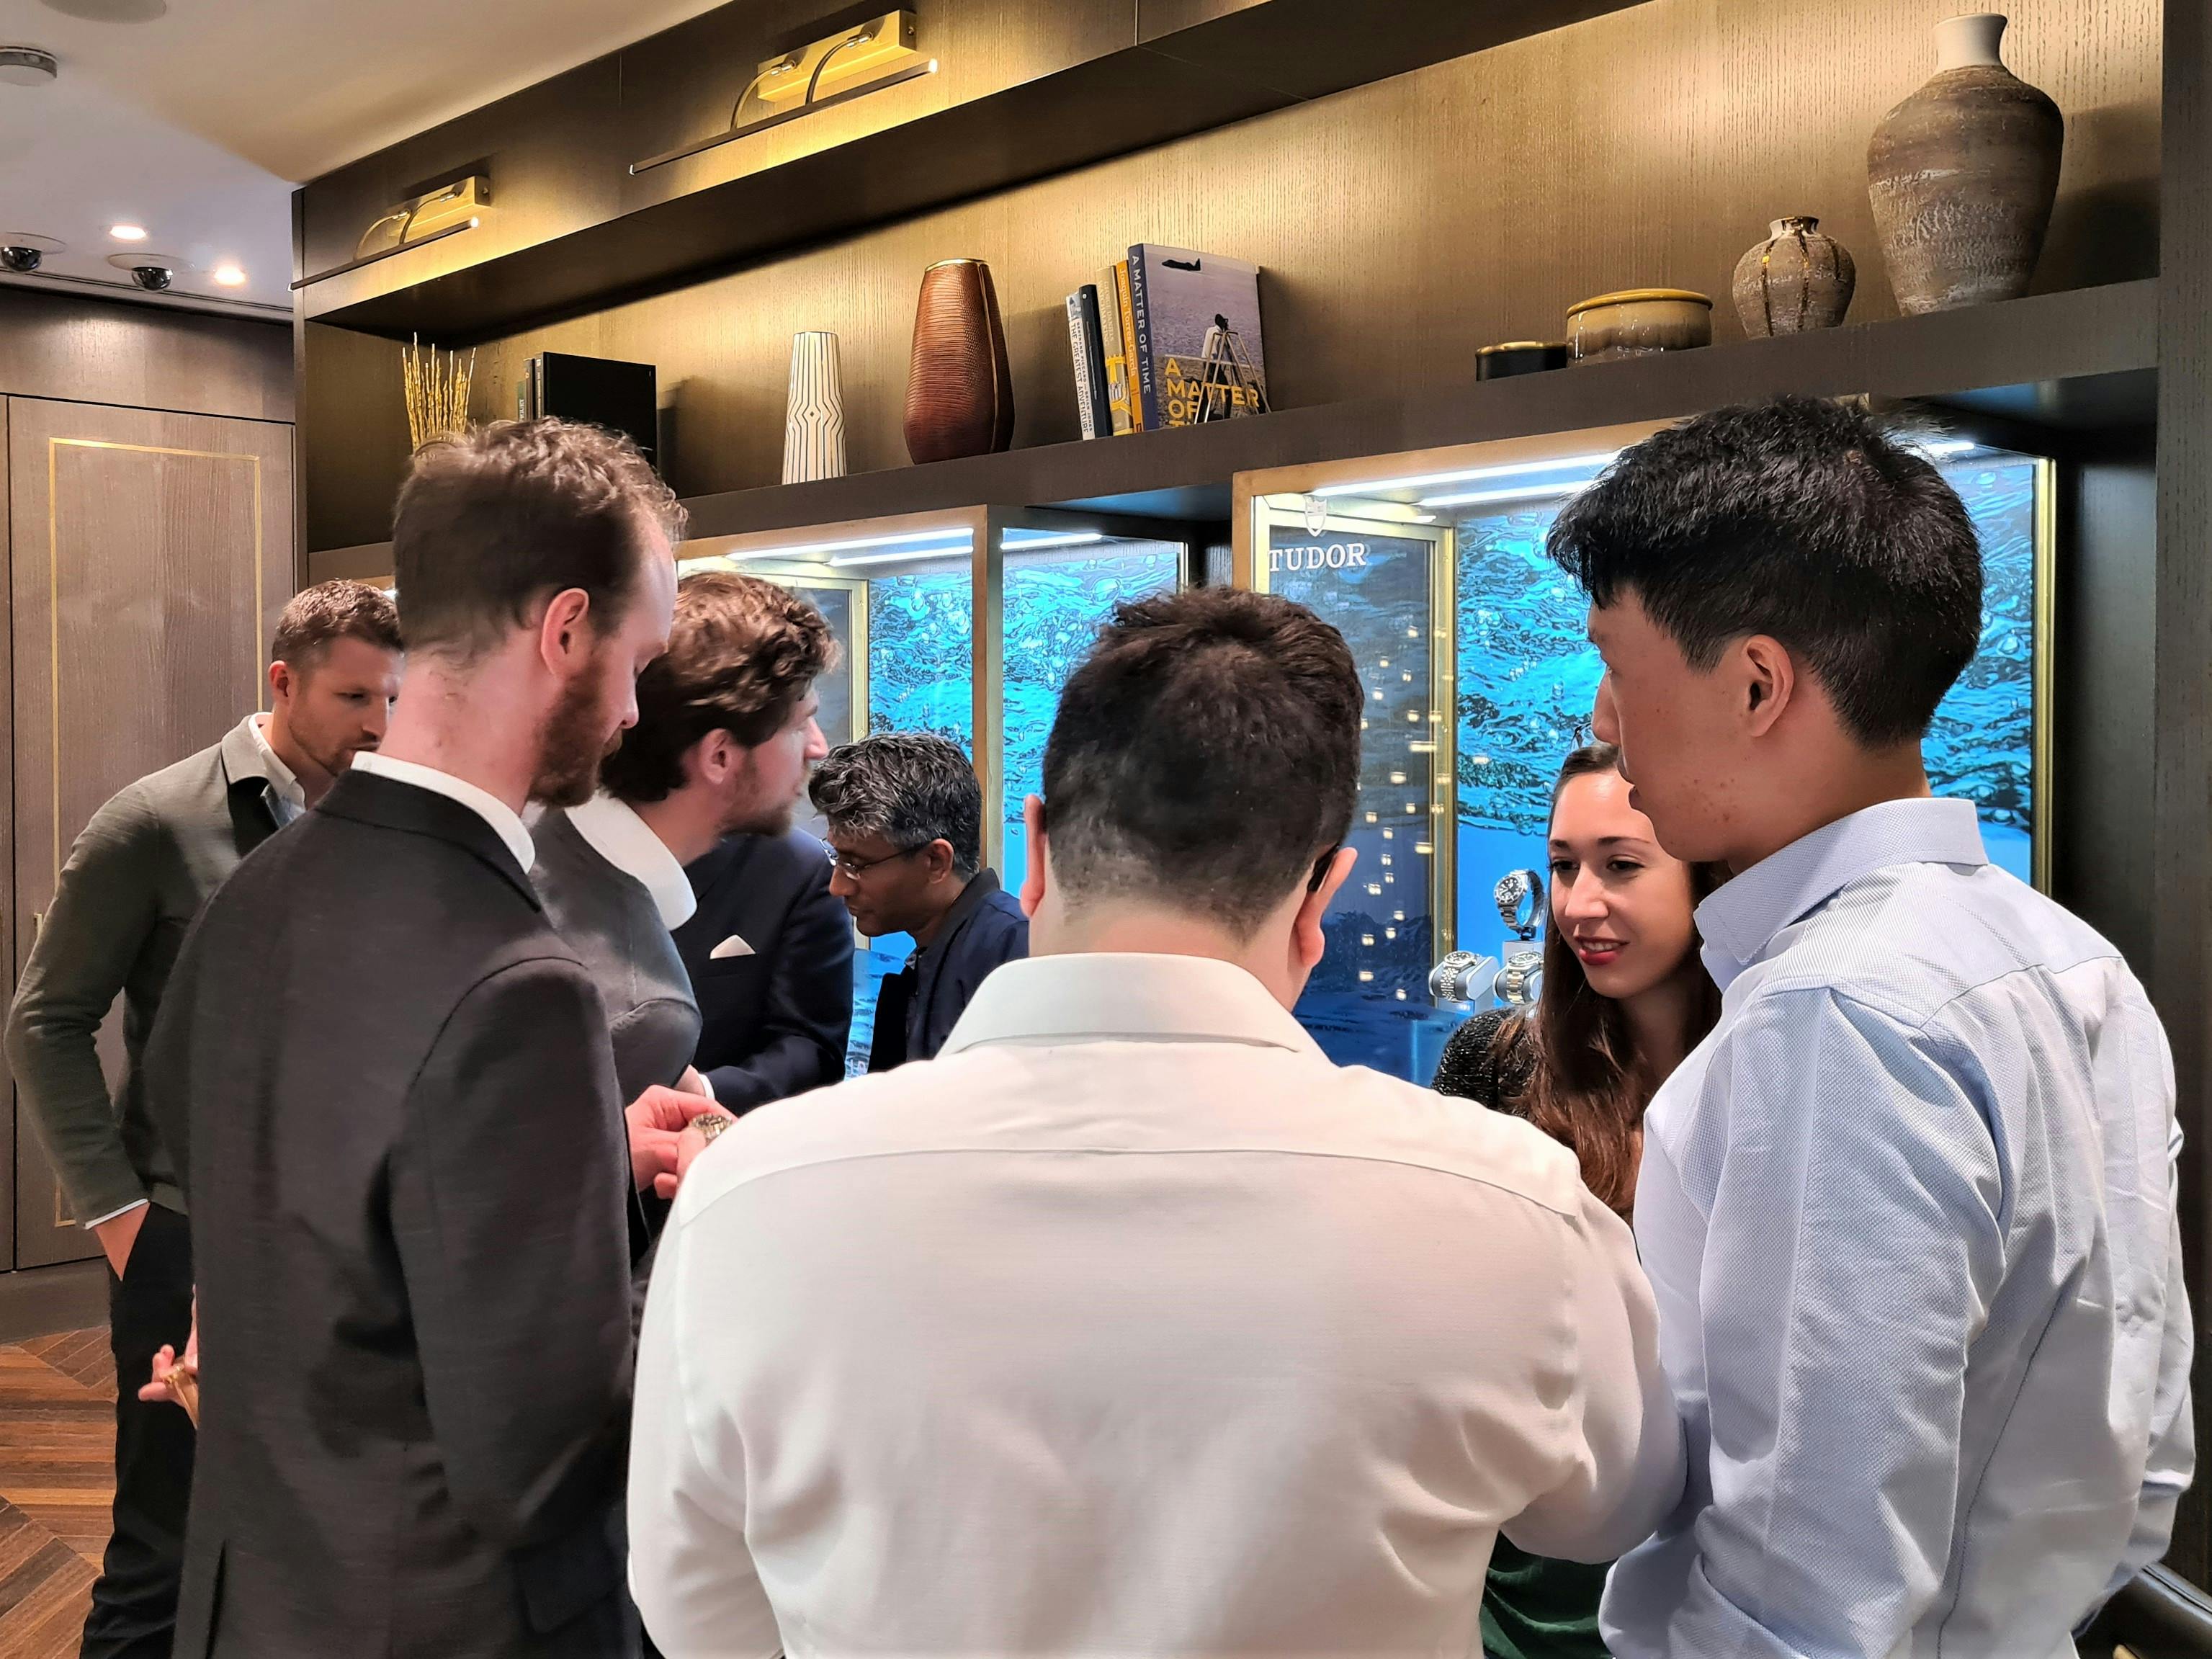 People looking at watches and watch cases at our recent event with a Retail Partner